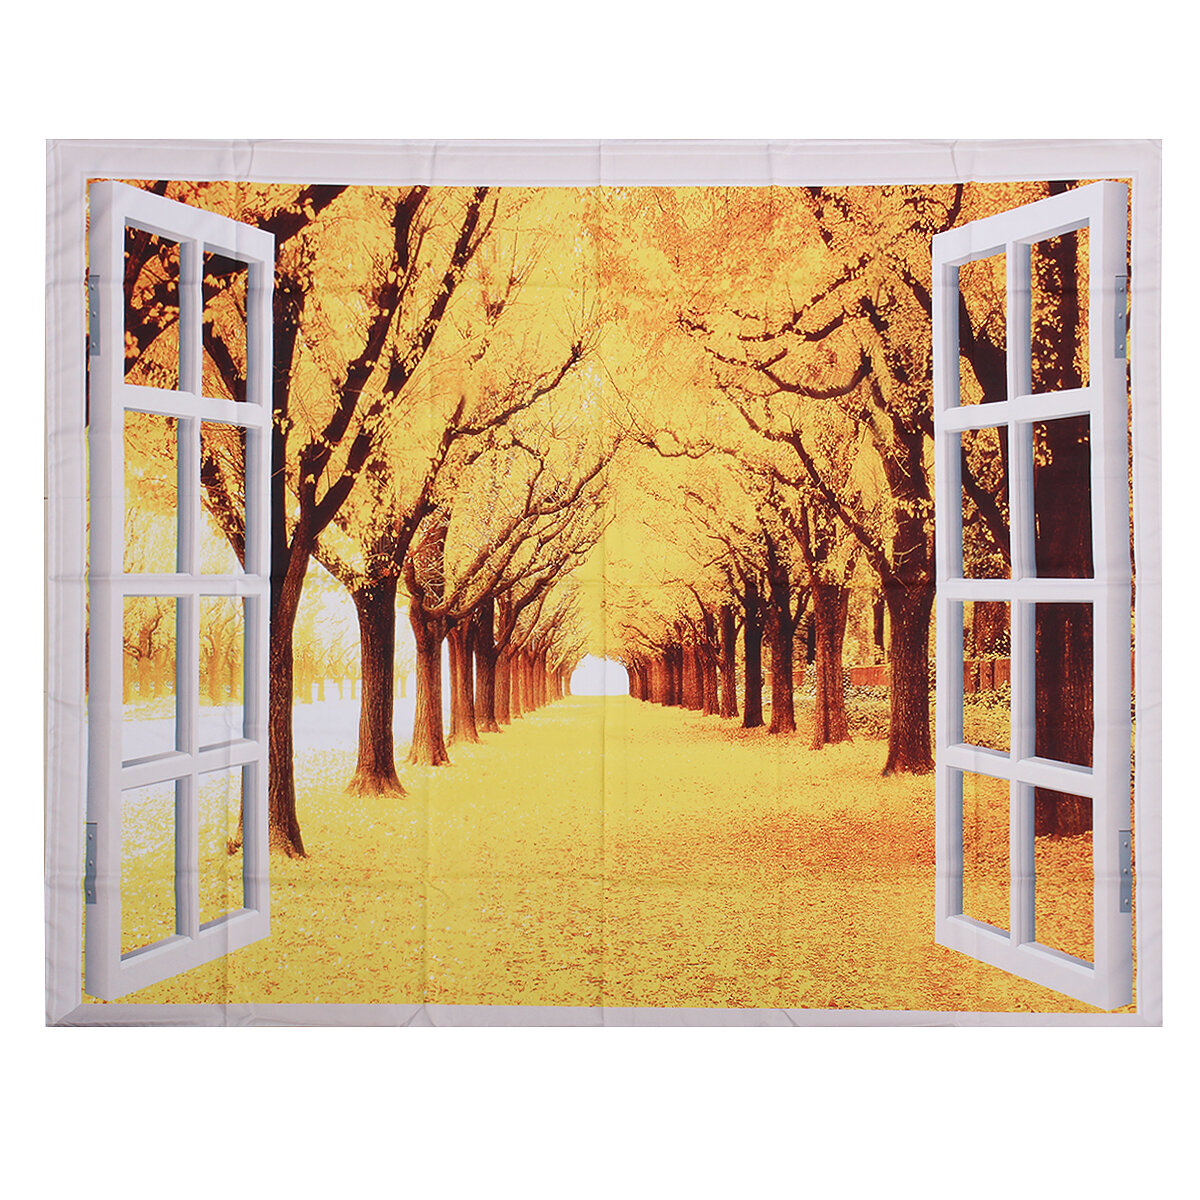 150*130cm Seasonal Forest Blanket Painting Bedroom Decor Art Wall Hanging Tapestry Home Living Room Office Ornament Supplies